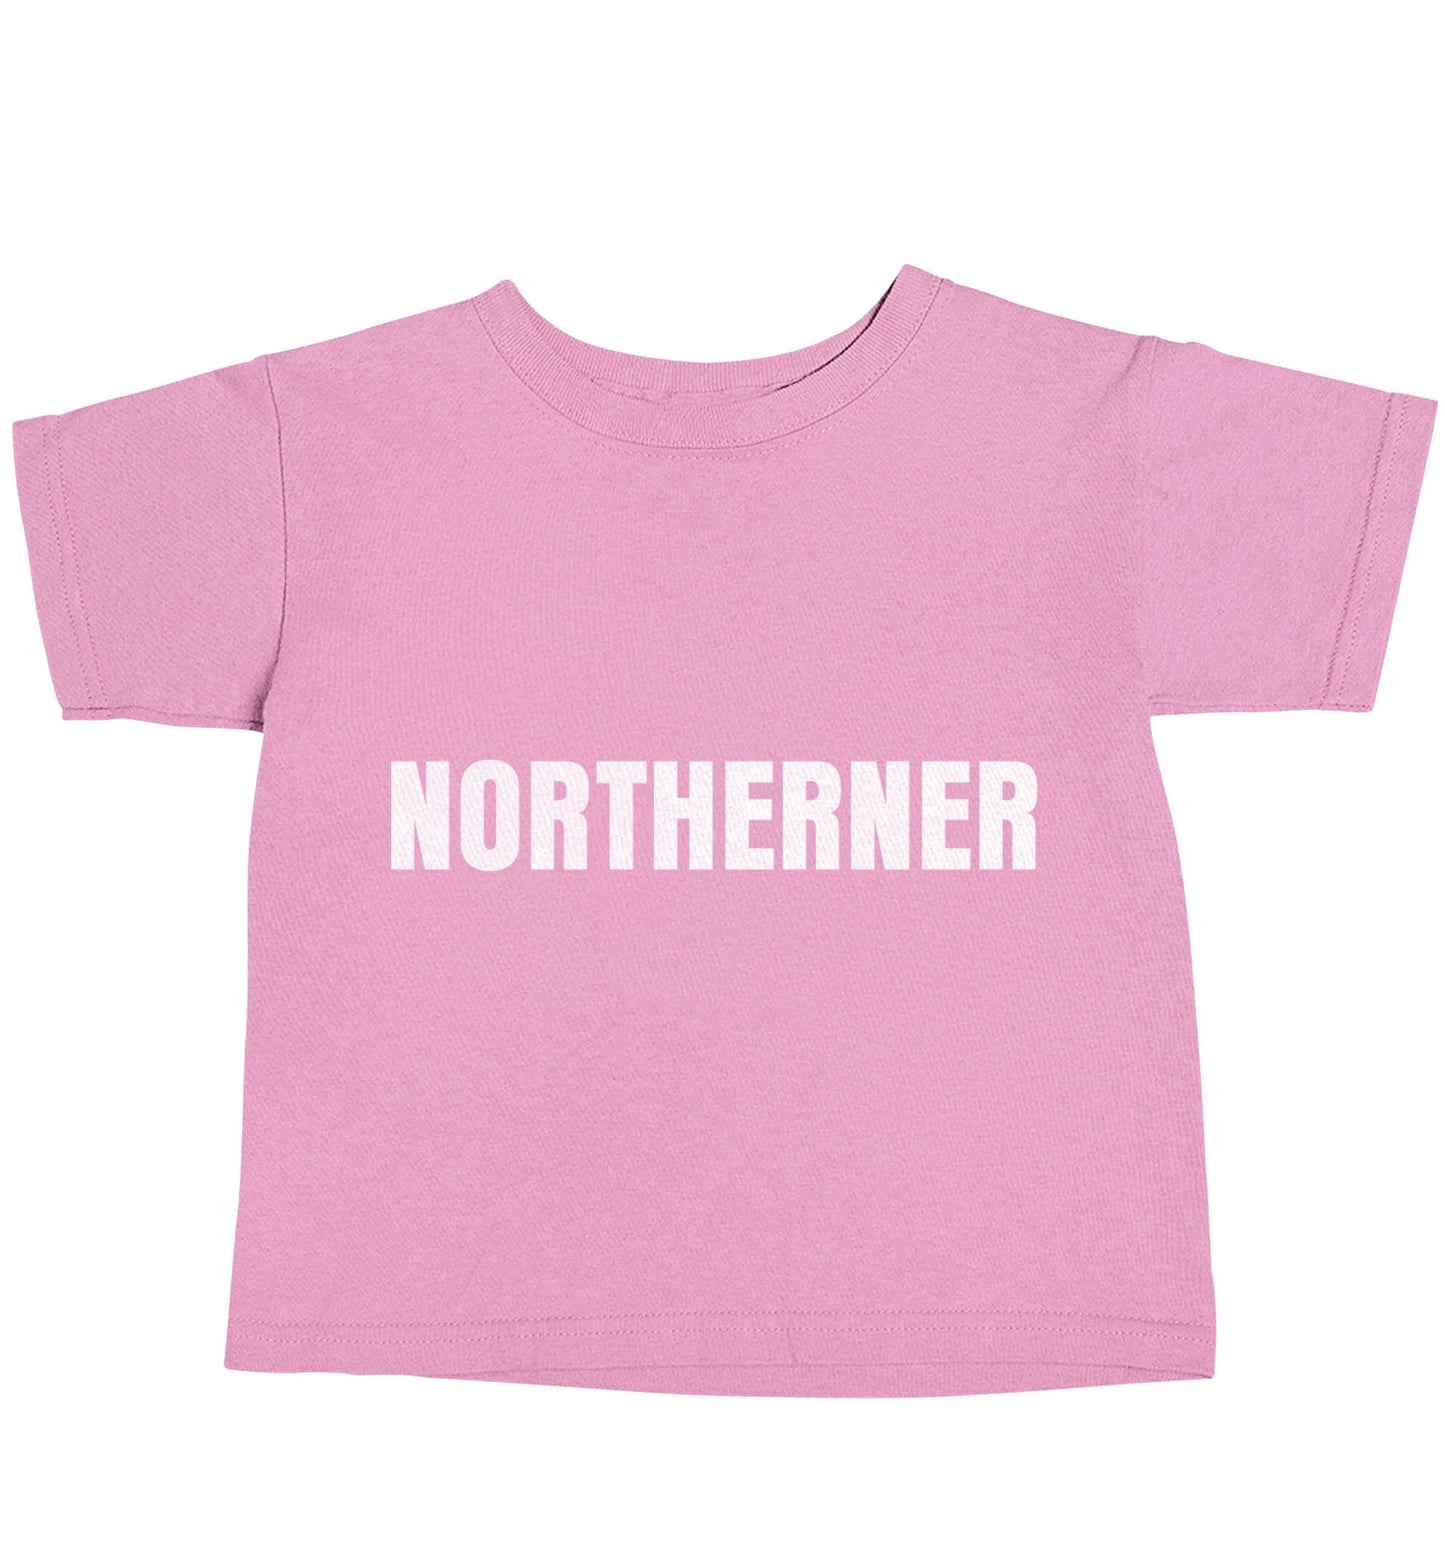 Northerner light pink baby toddler Tshirt 2 Years